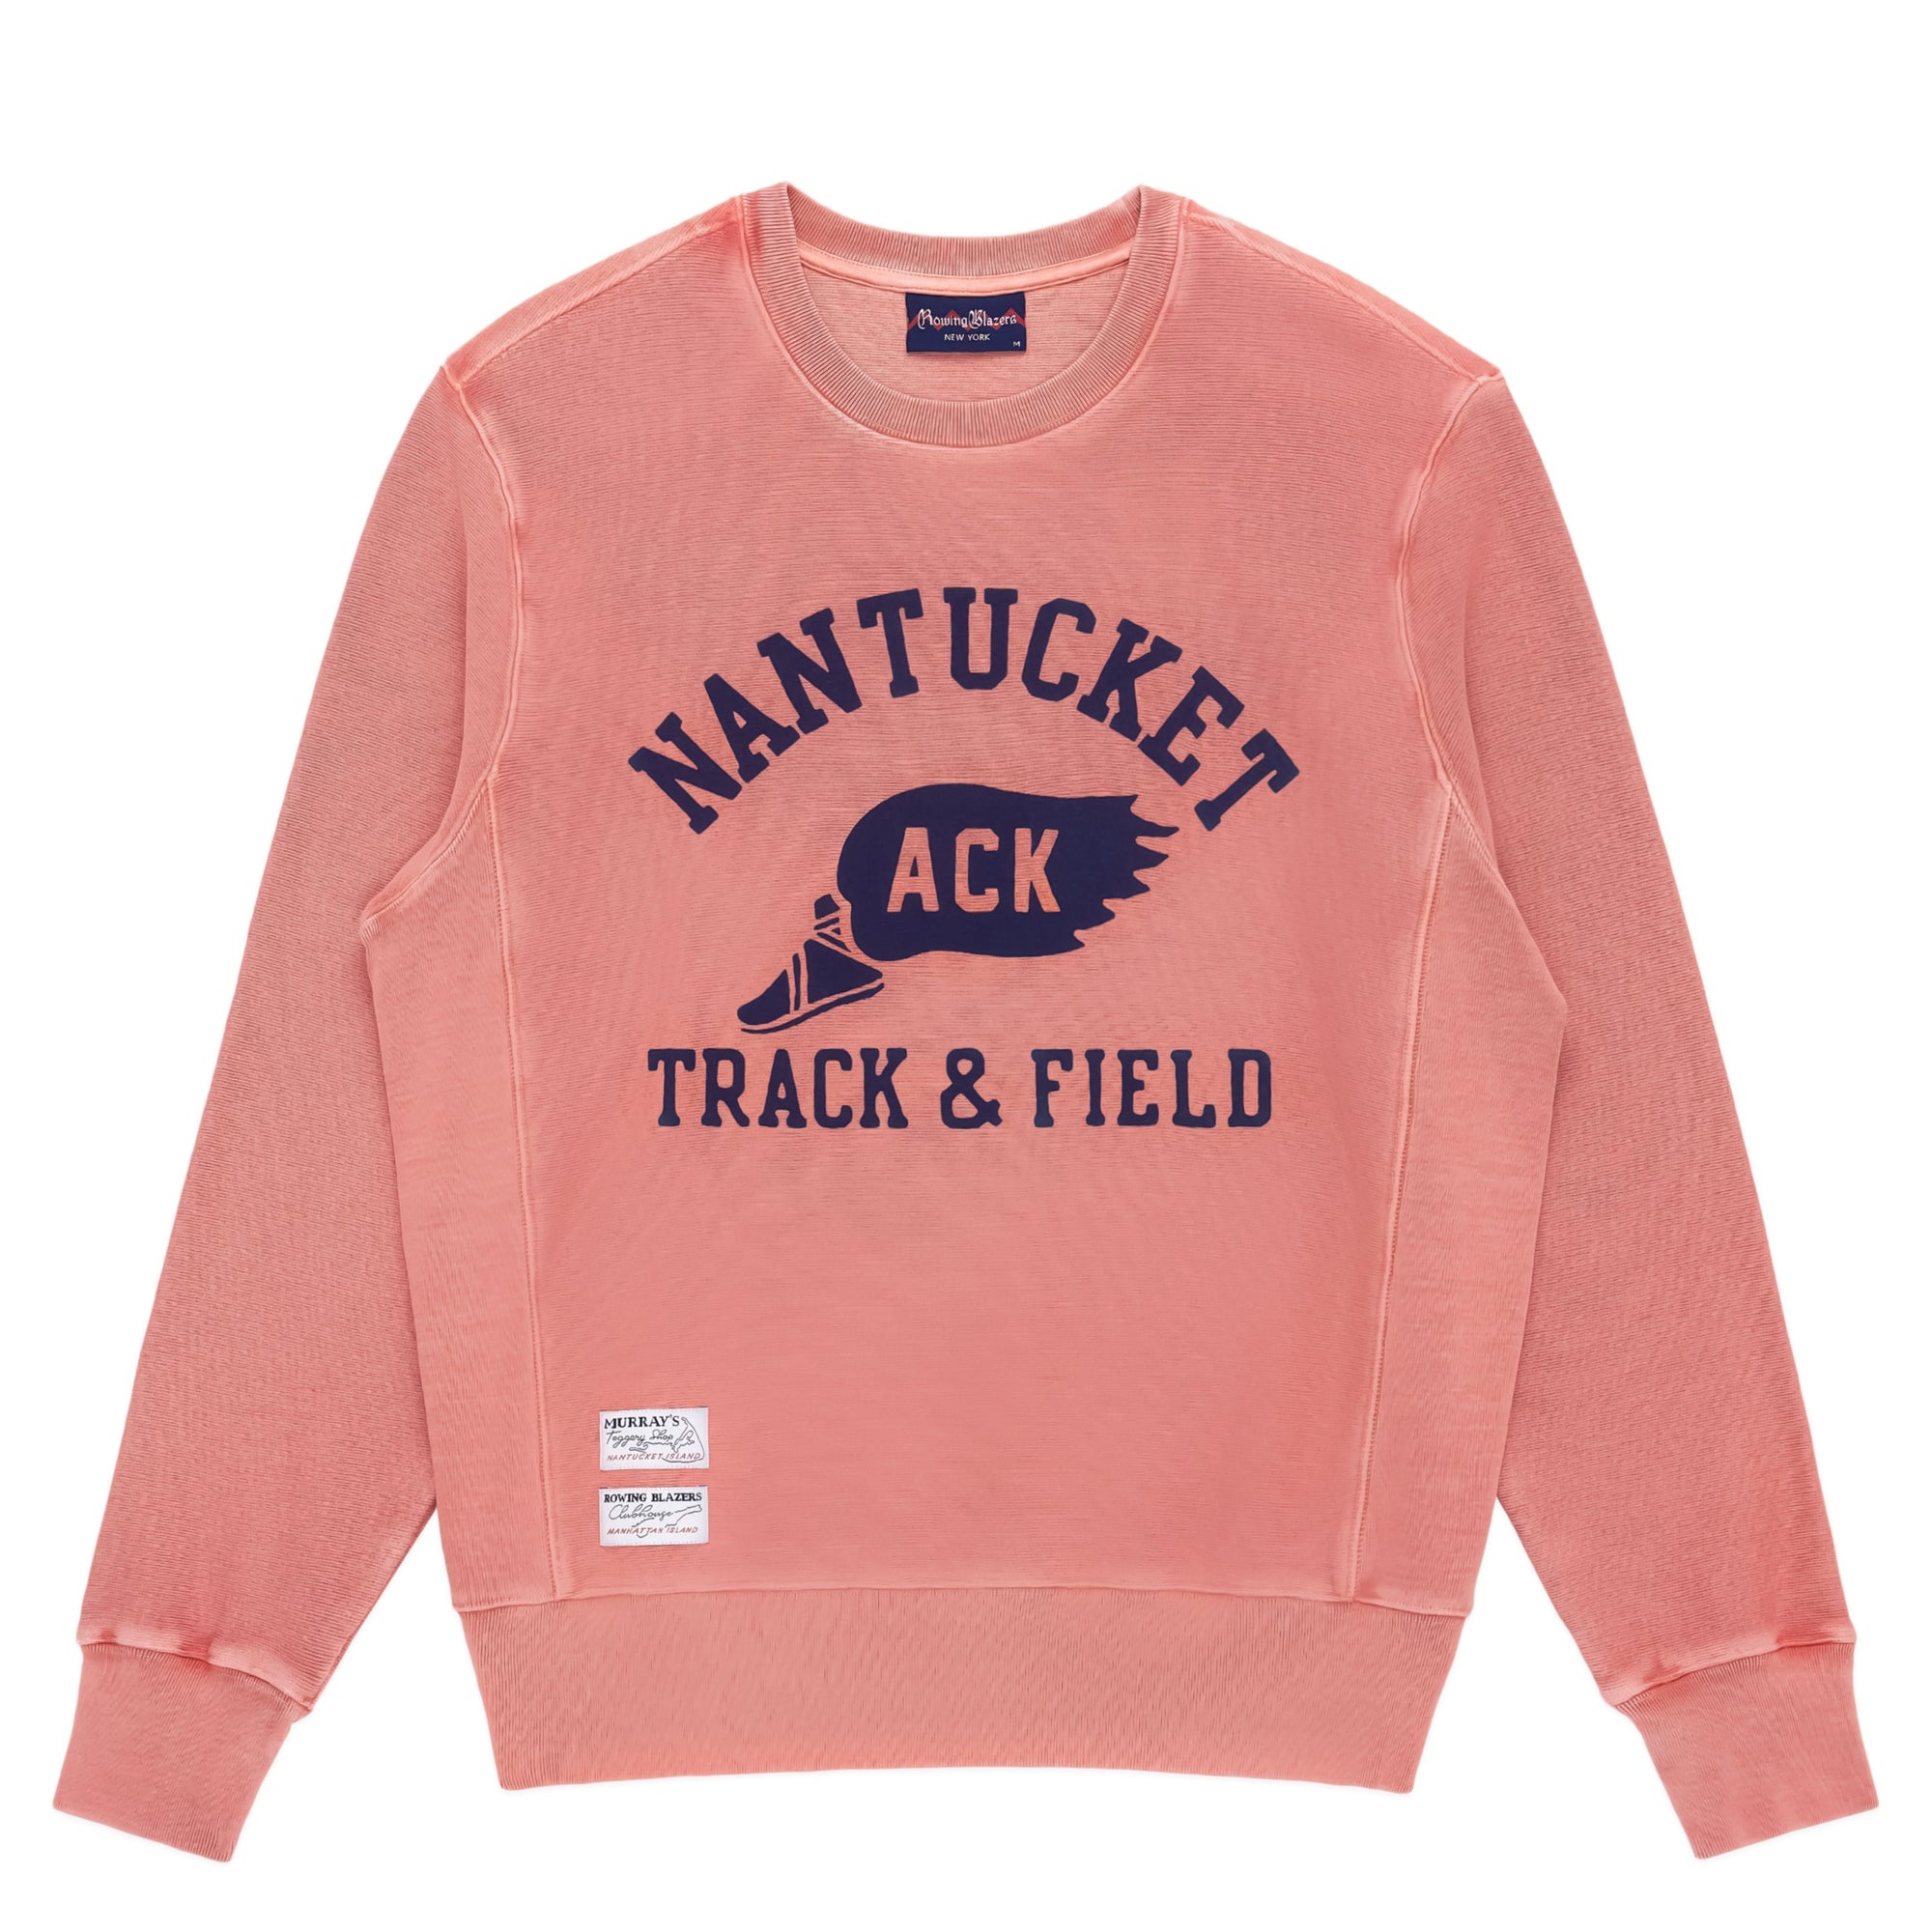 Rowing Blazers x Murray's Track and Field Crewneck - Nantucket Red